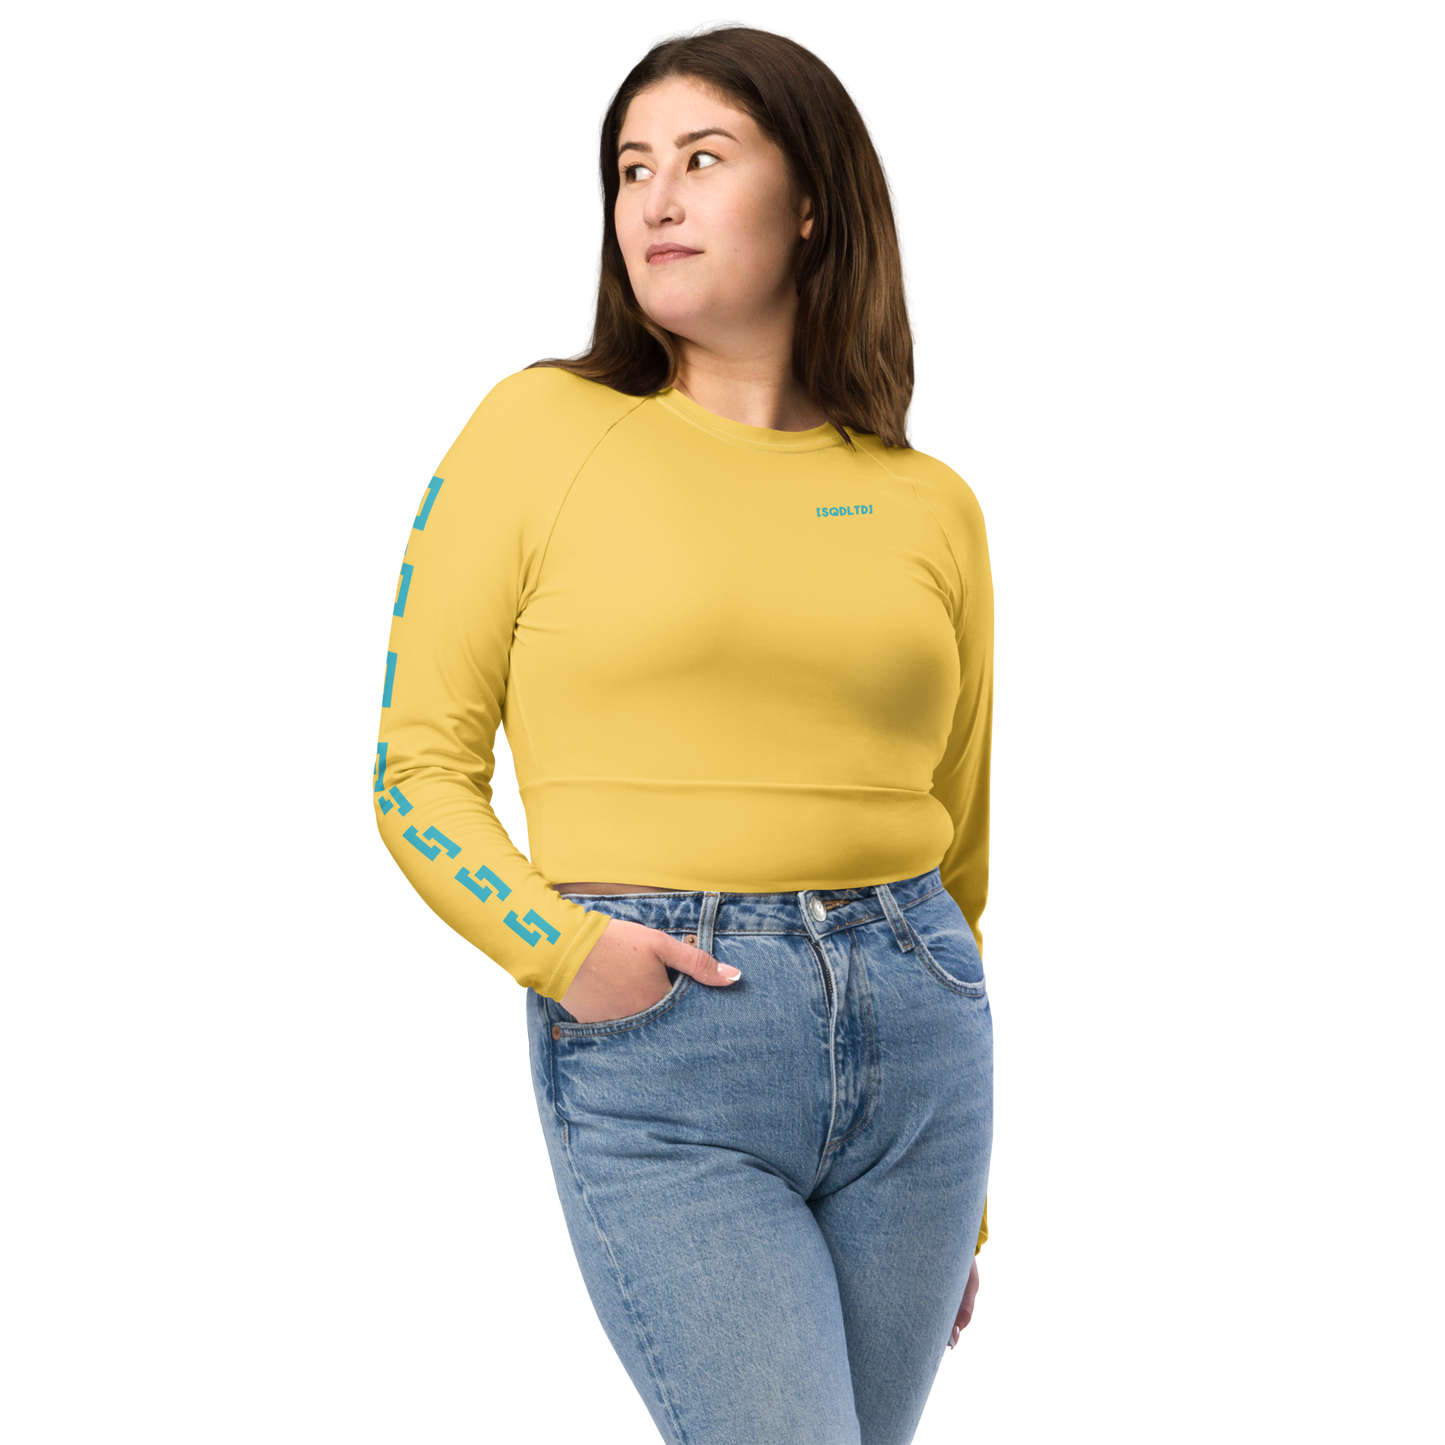 Sqdltd SP24 Recycled long-sleeve crop top Popsicle